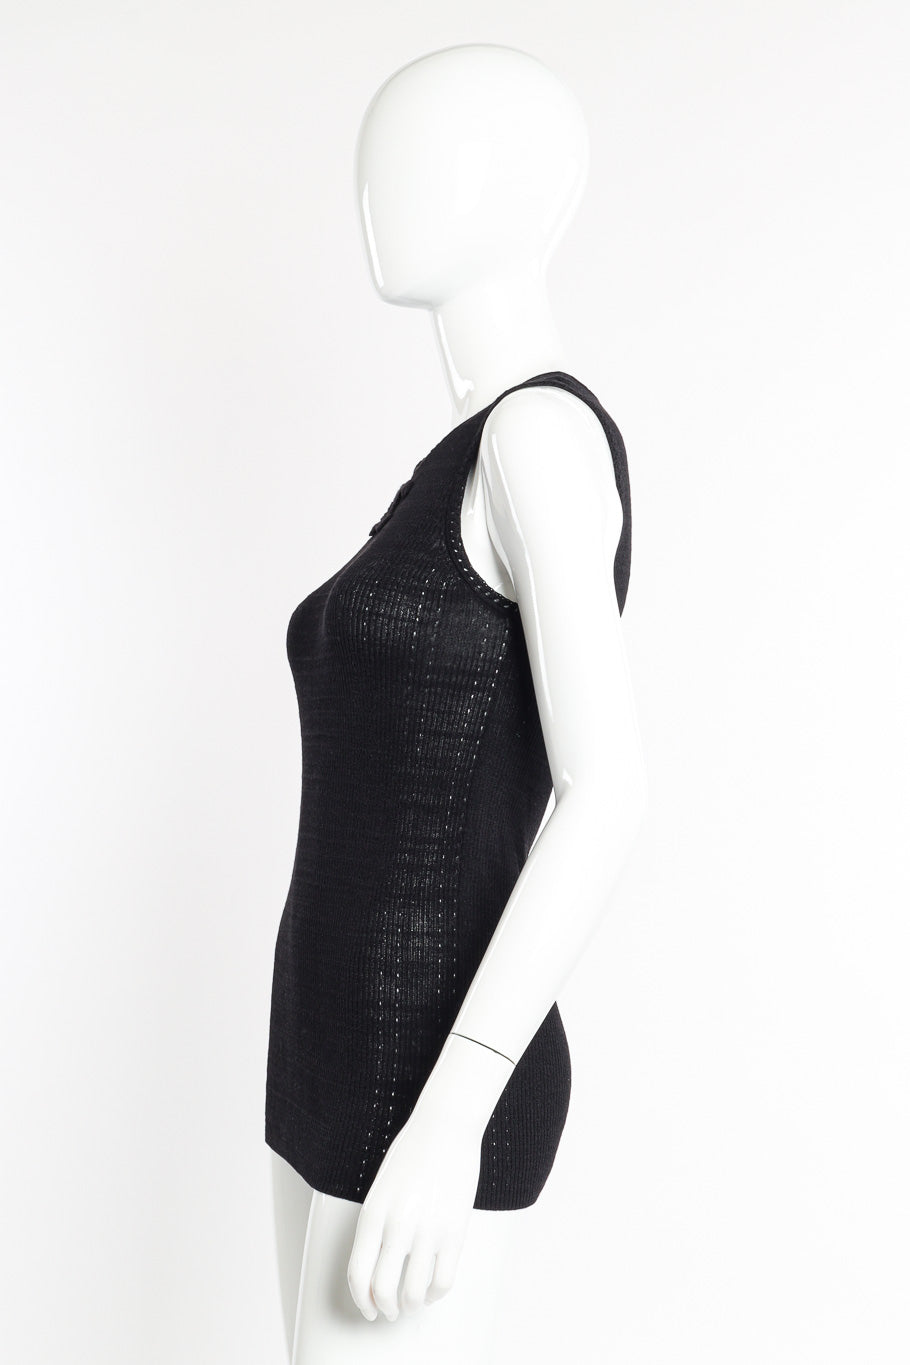 Chanel Logo Knit Tank Top side view on mannequin @Recessla